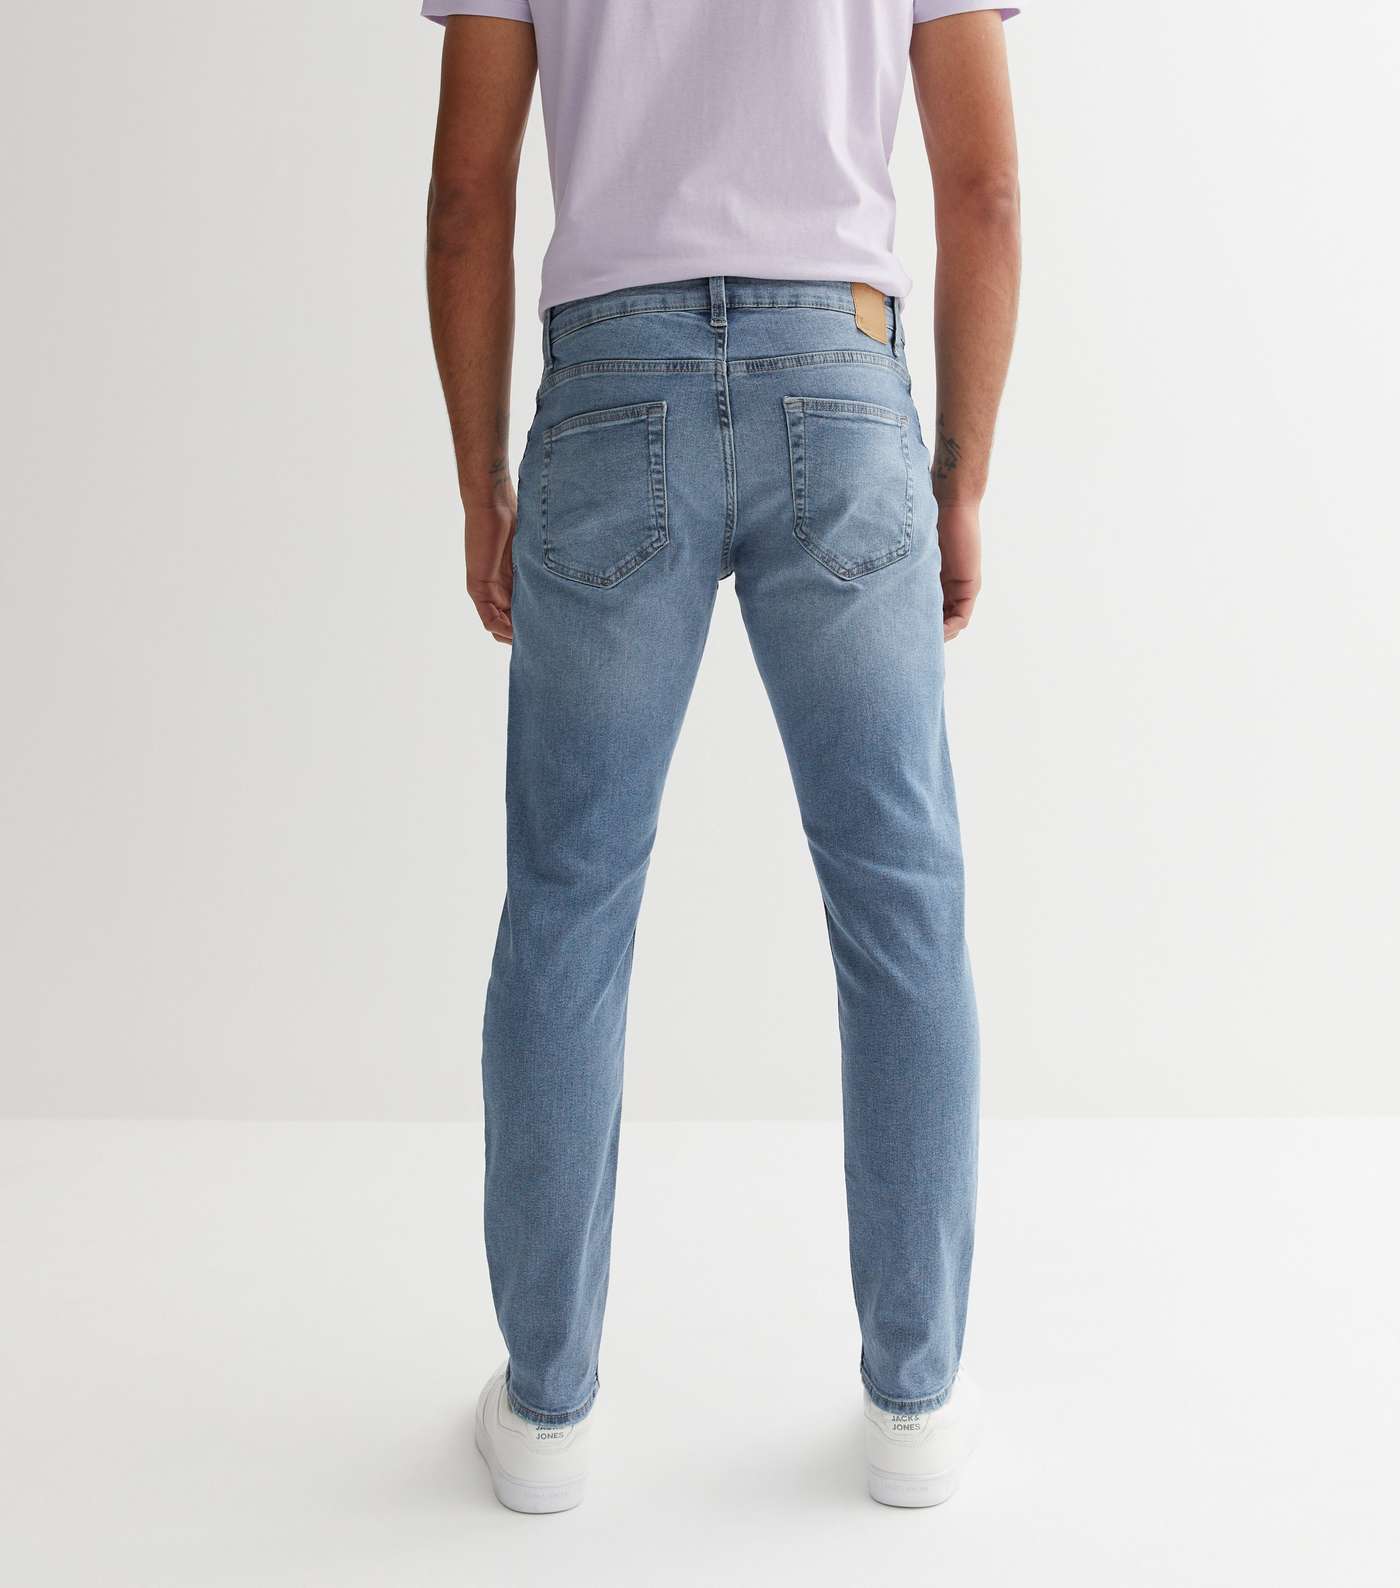 Only & Sons Bright Blue Slim Fit Jeans Image 3